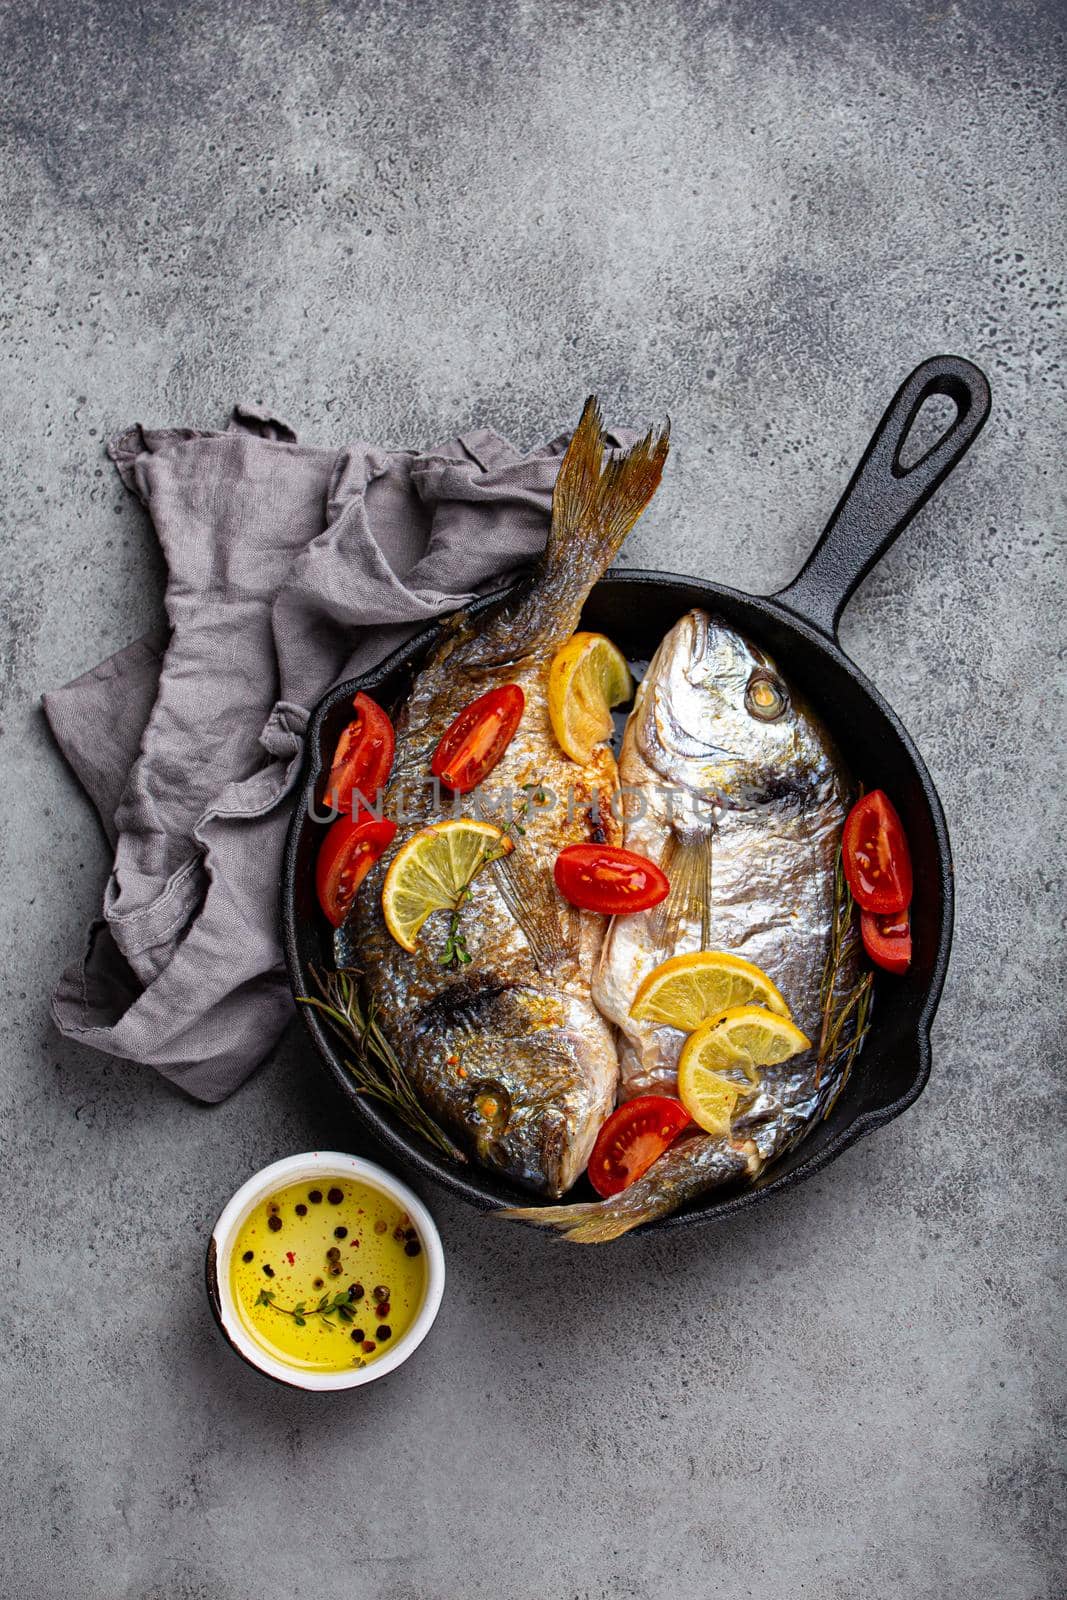 Roasted or fried fresh fish sea bream or dorado with lemon, herbs and tomatoes in cast iron skillet great for healthy meal or Mediterranean diet on rustic grey stone background from above